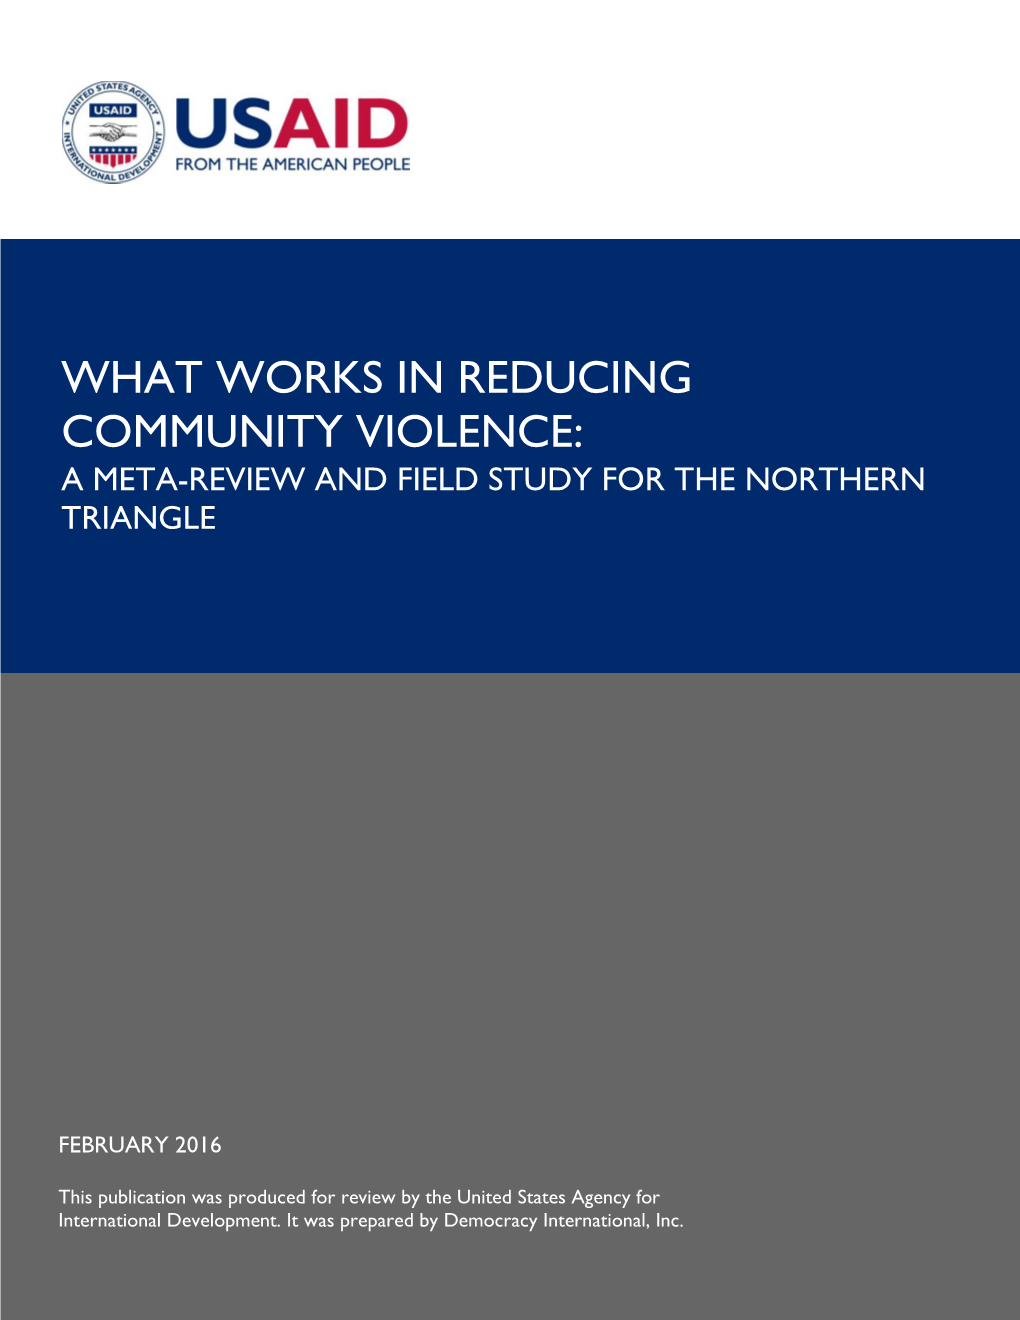 What Works in Reducing Community Violence: a Meta-Review and Field Study for the Northern Triangle